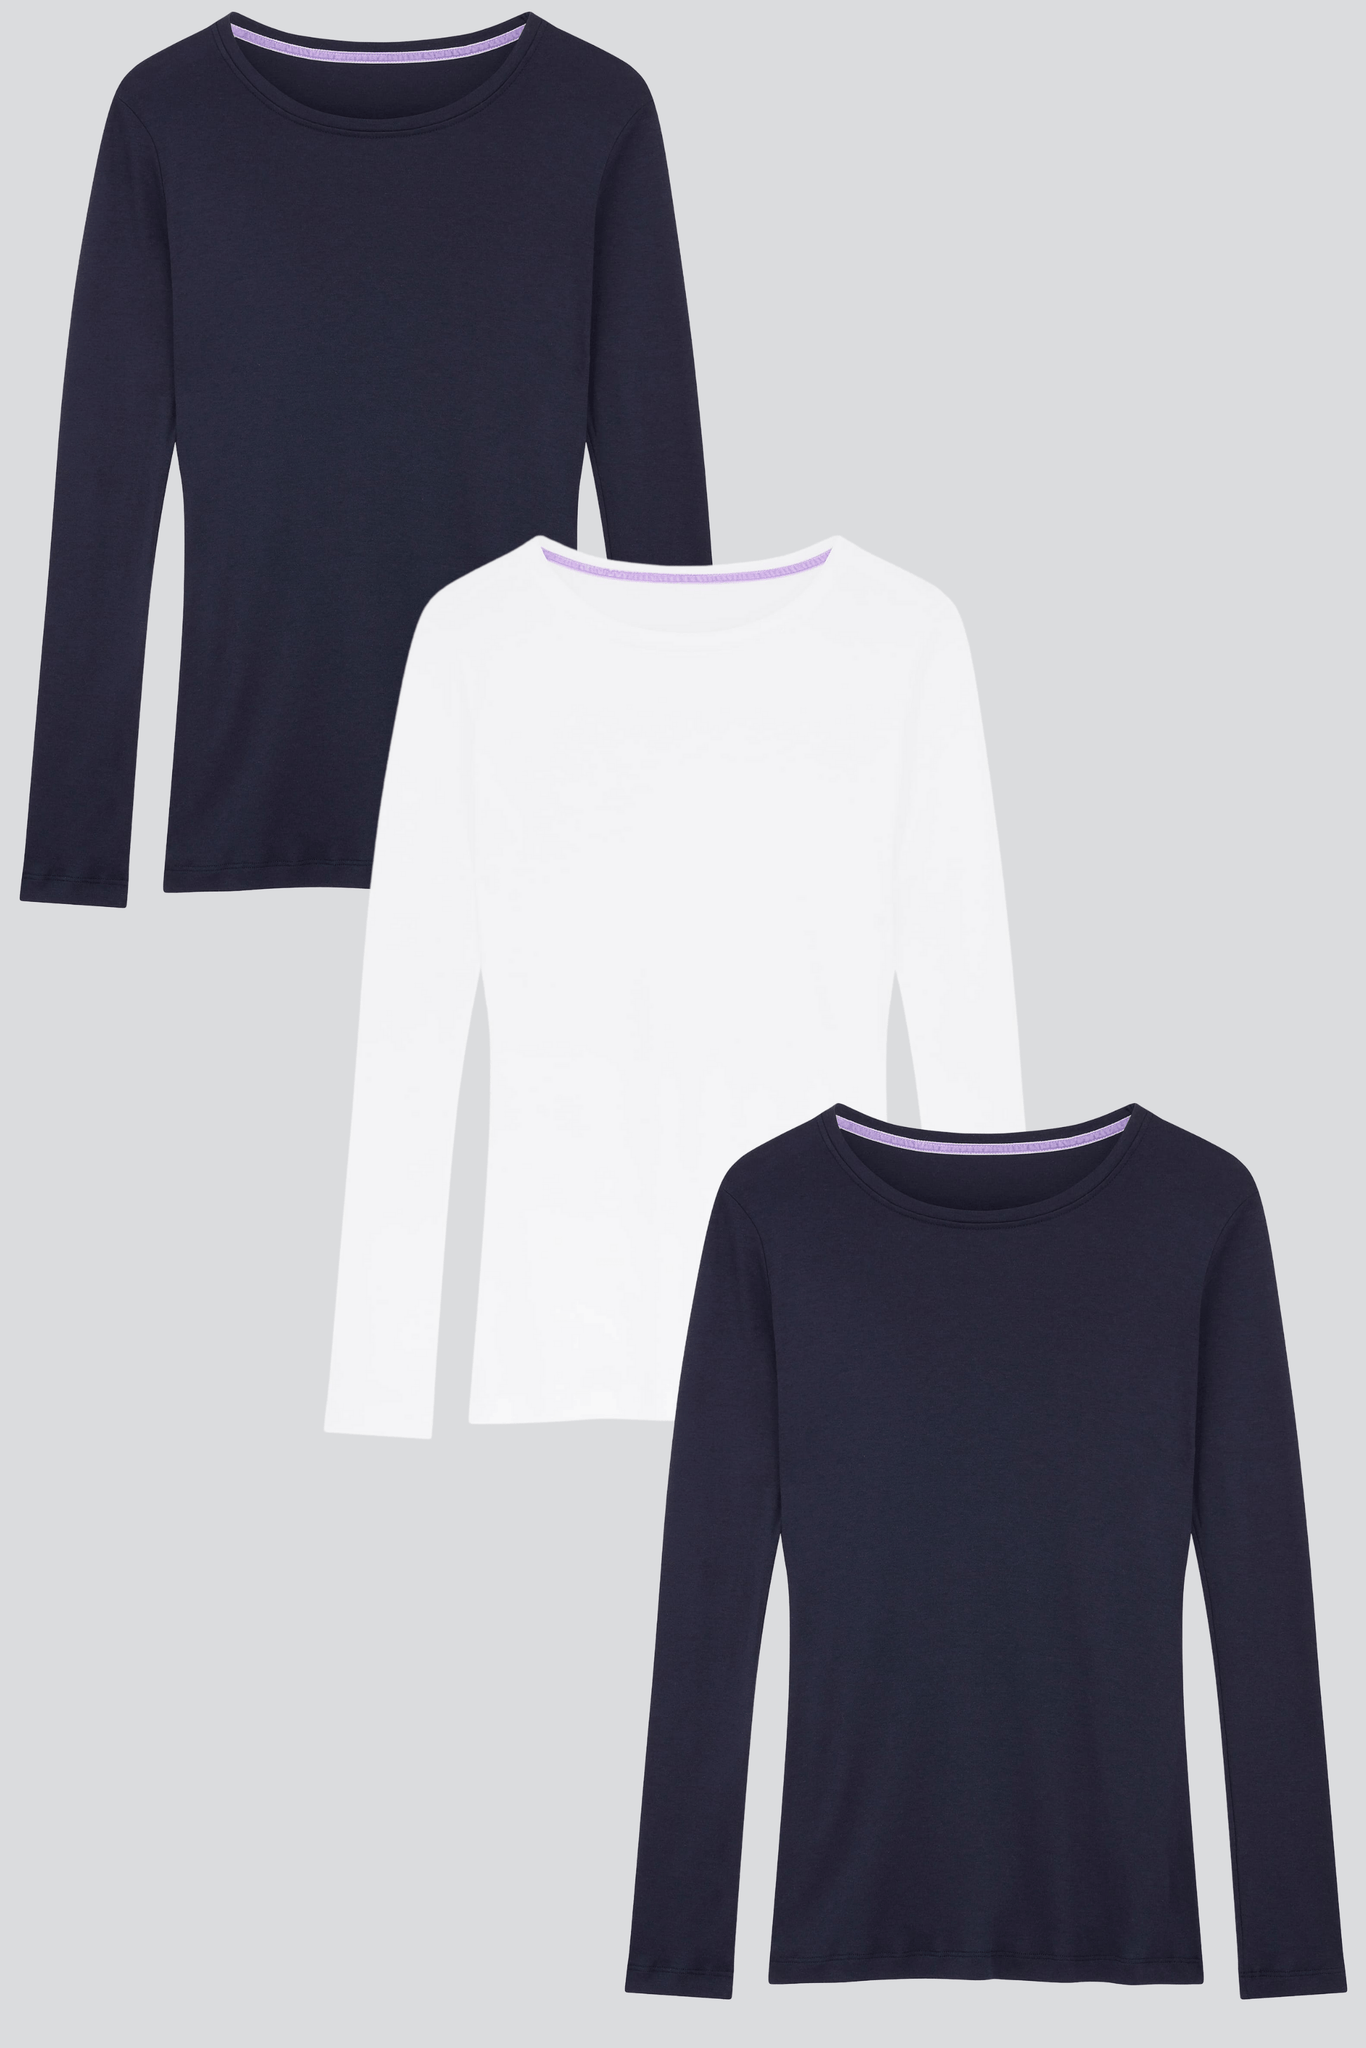 Long Sleeve Crew T-shirt Lavender | Hill Womens Round | Top – Clothing Lavender Neck Neck Hill